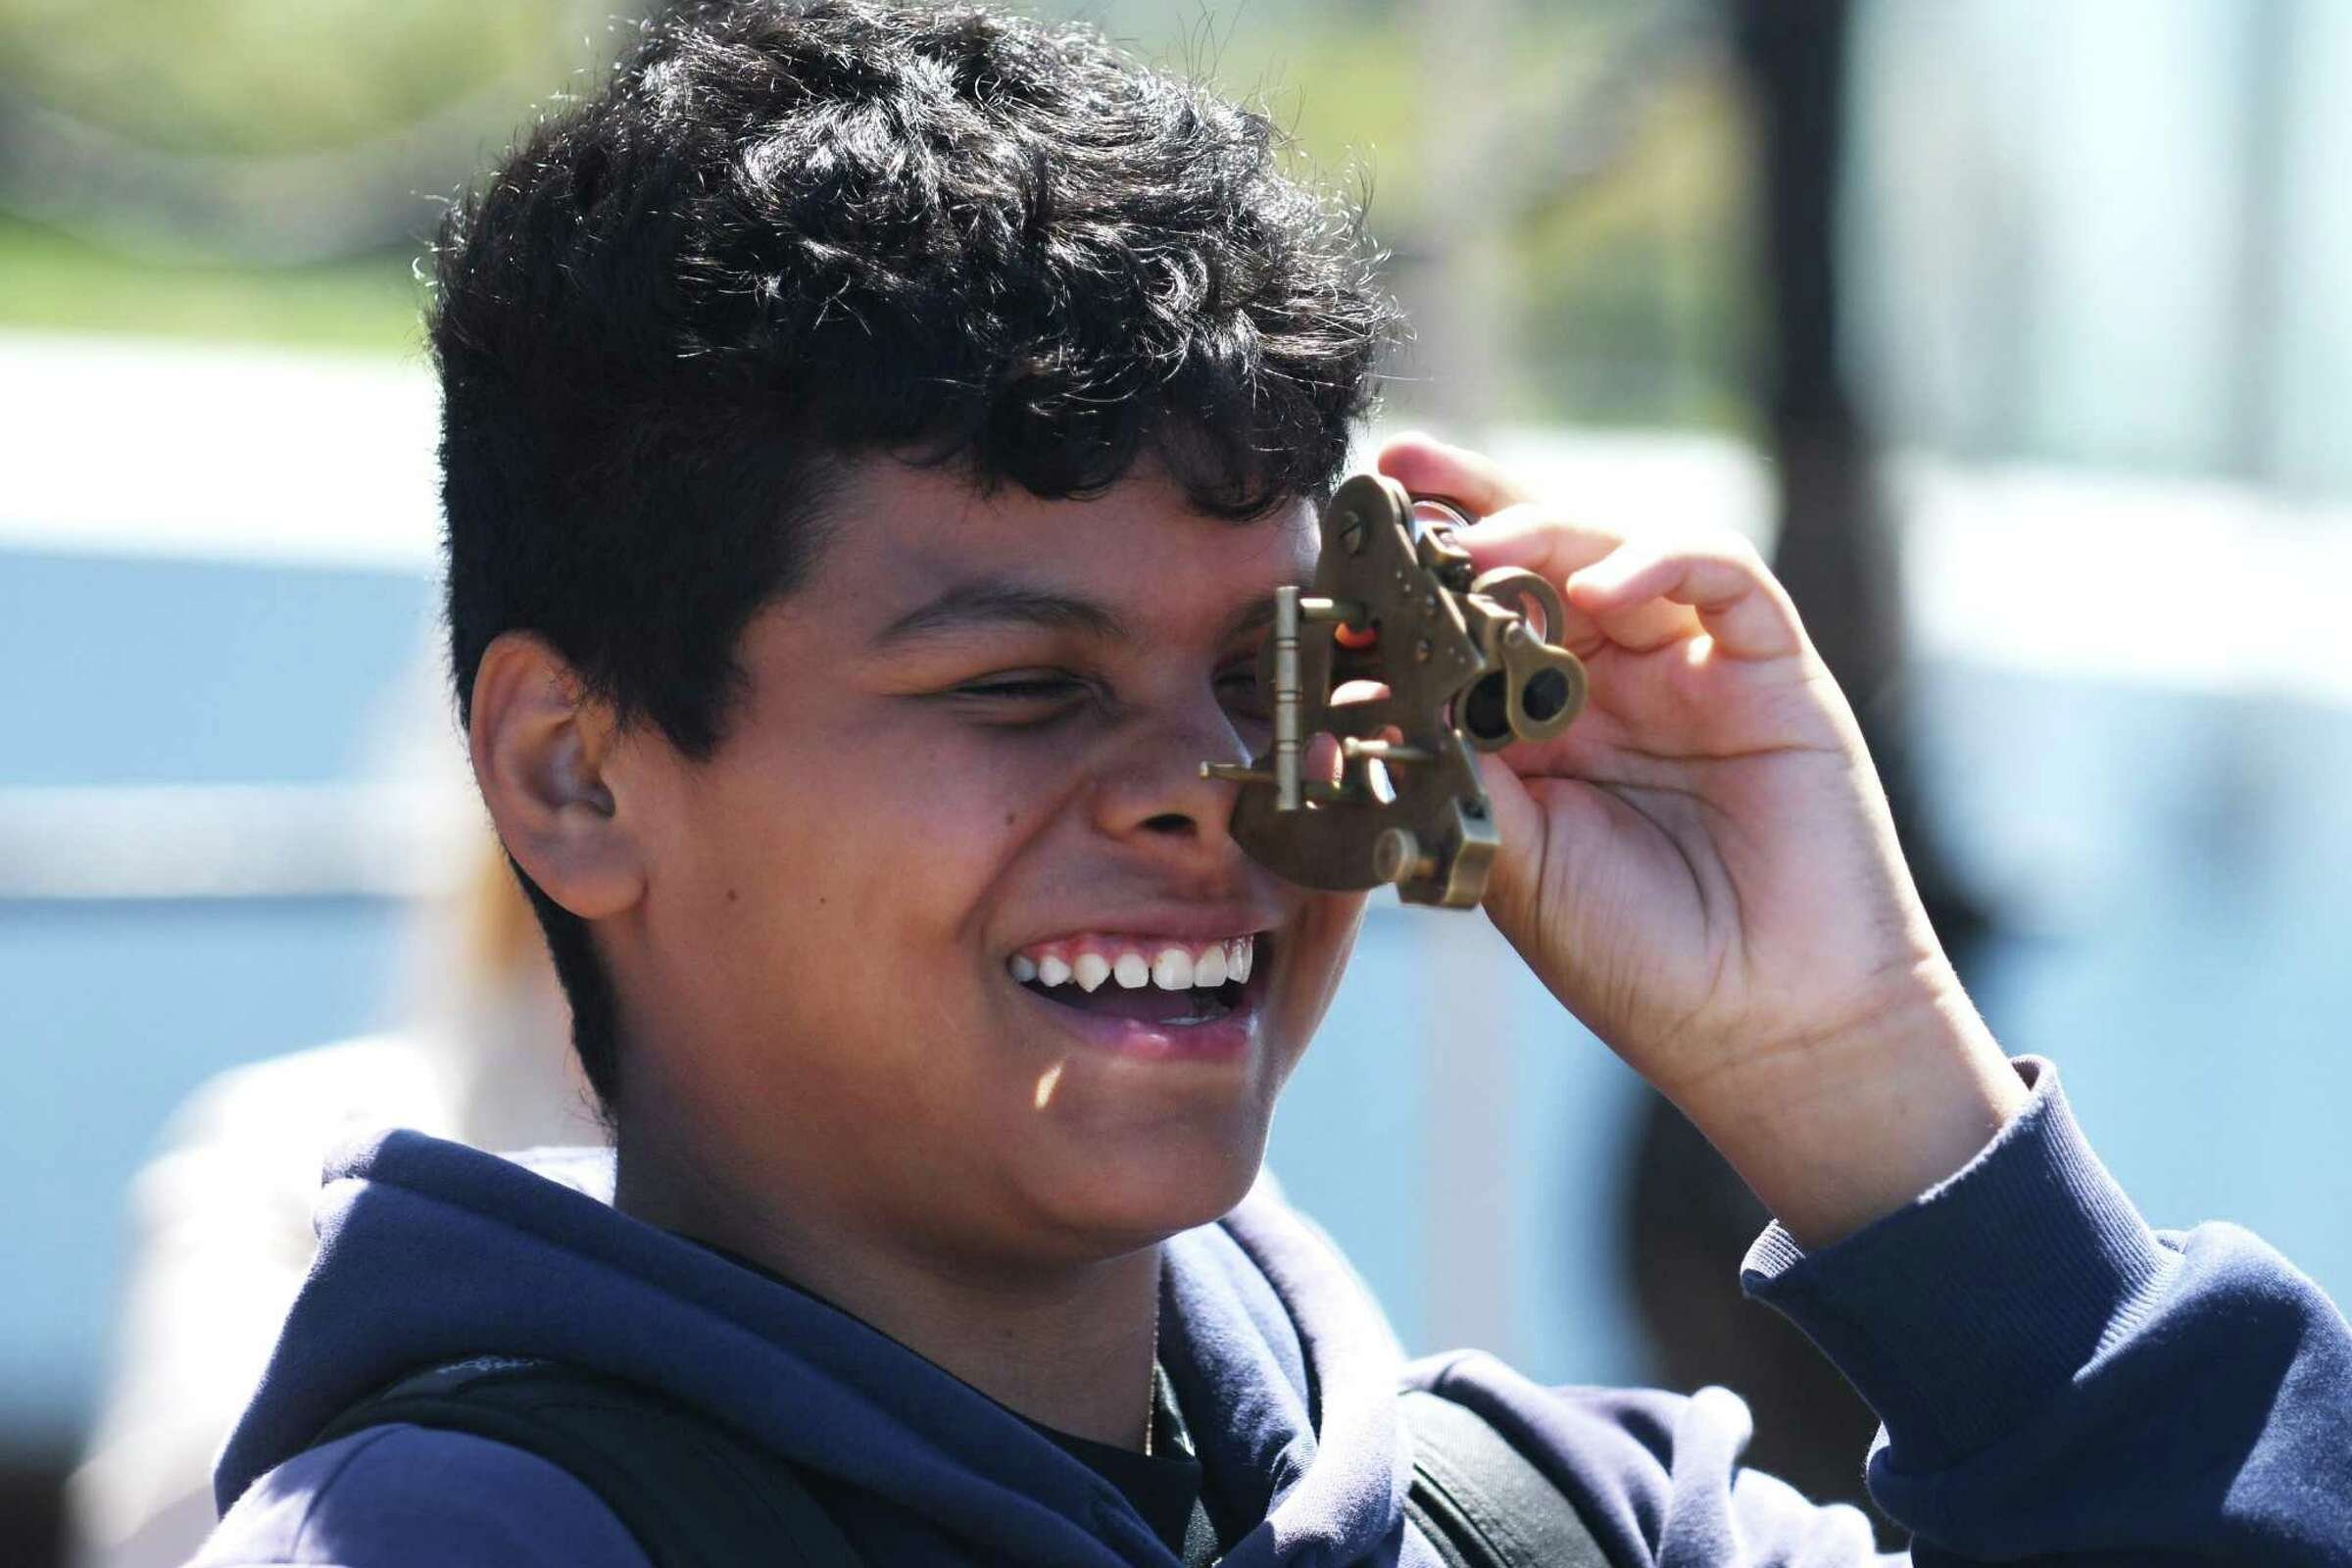  Eighth-grader Eduardo Quintana uses a sextant to determine geographical position while aboard a reproduction of the Amistad slave ship docked at Harbor Point in Stamford, Conn. Monday, May 9, 2022. Eighth grade students toured the ship to kick off t